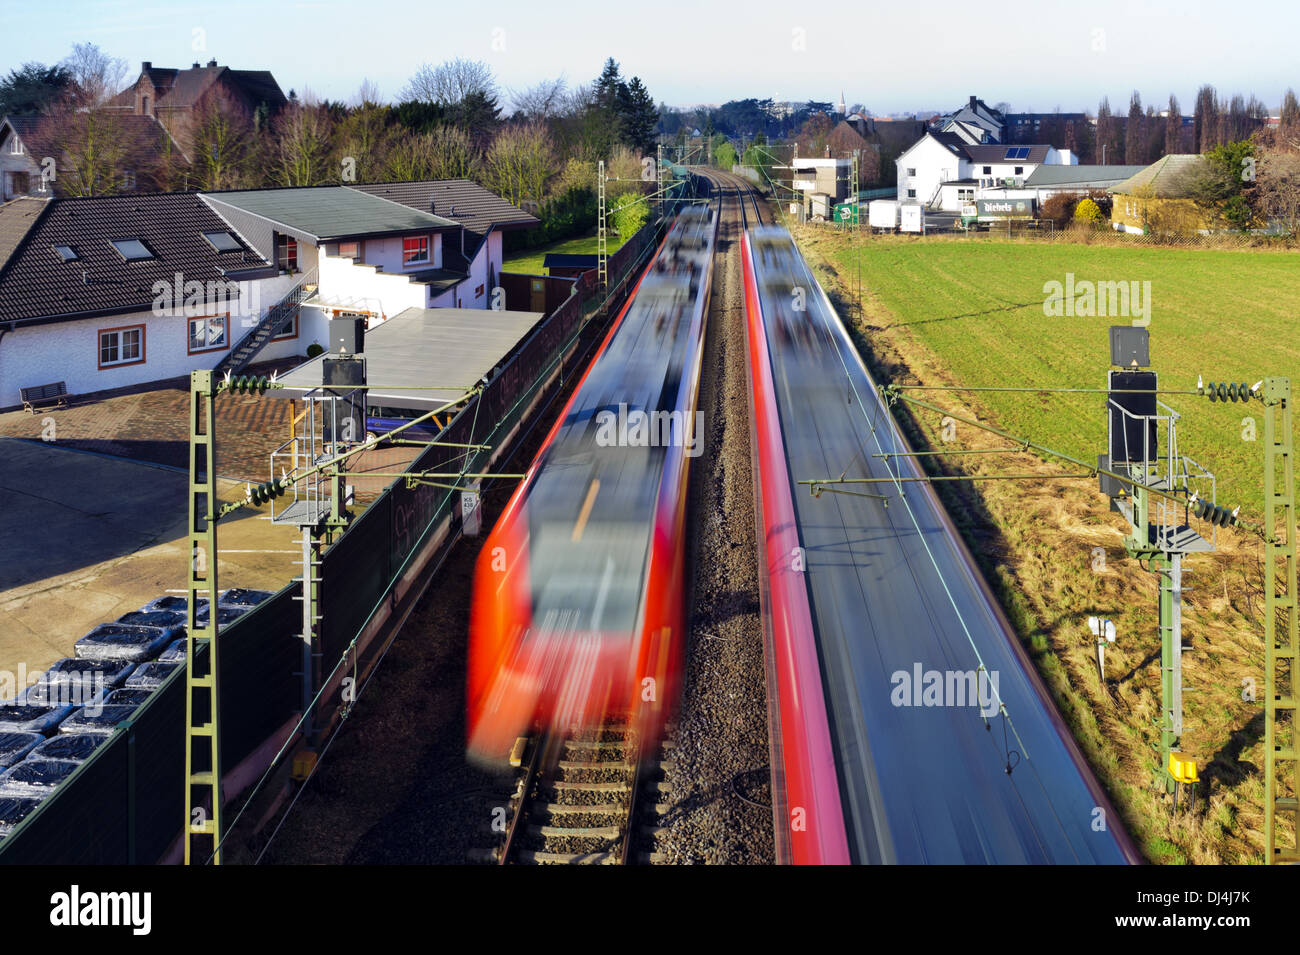 Two passenger trains meet on the open road Stock Photo